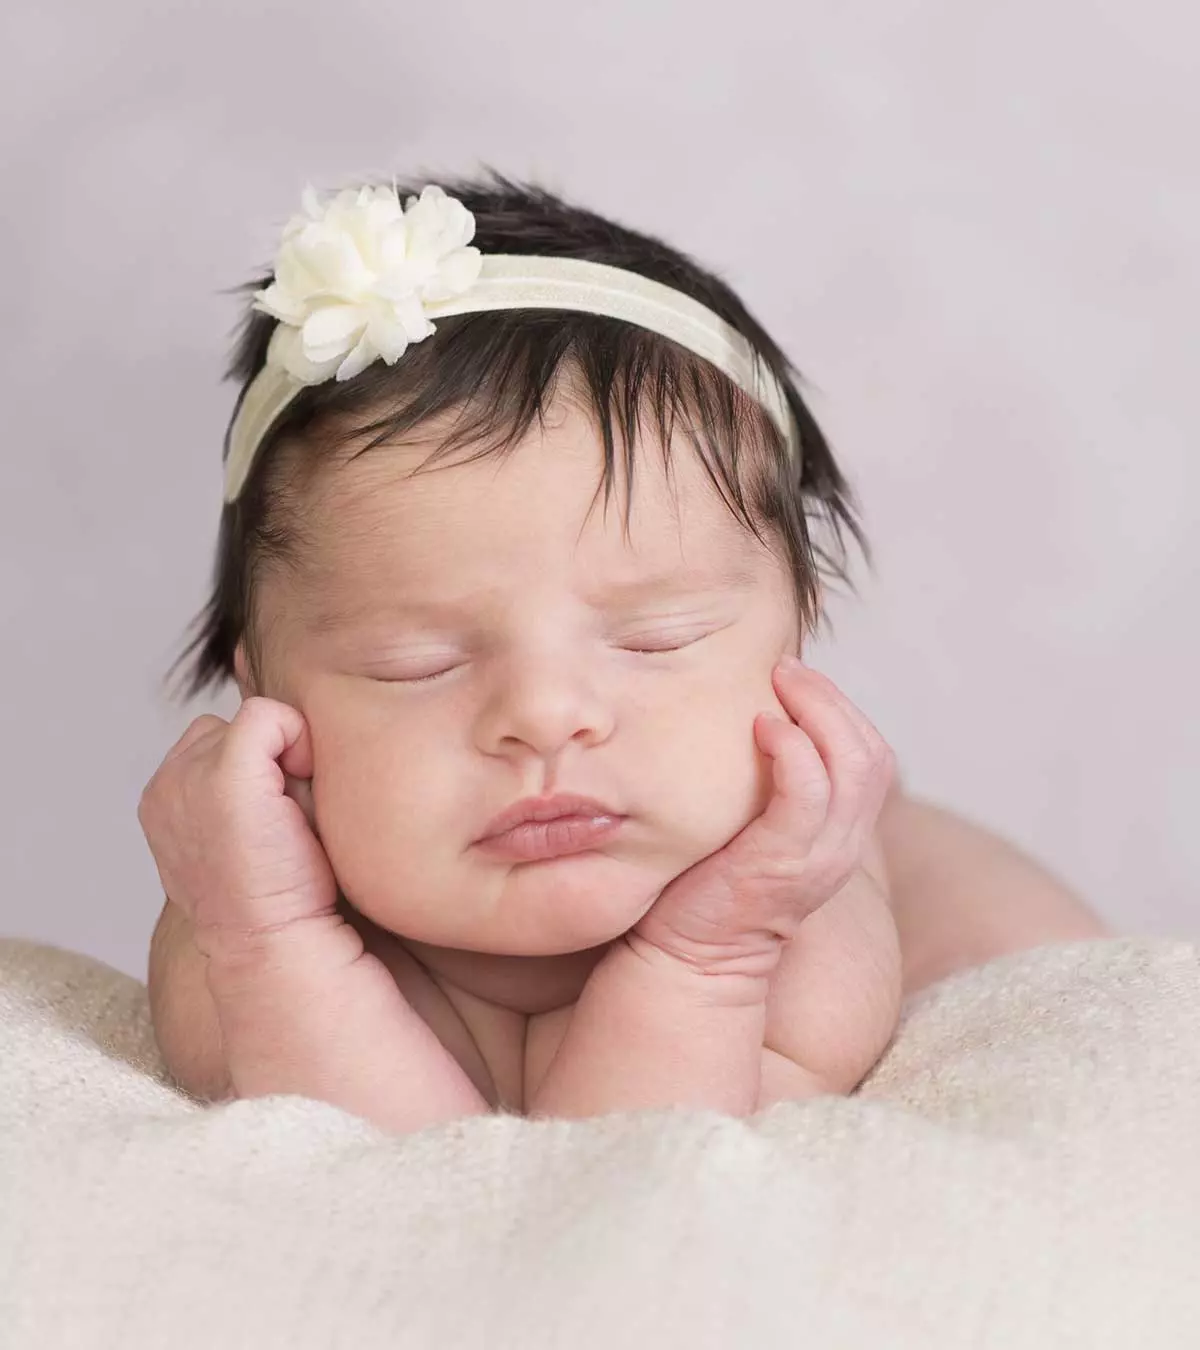 918 Baby Names That Mean Pure | MomJunction